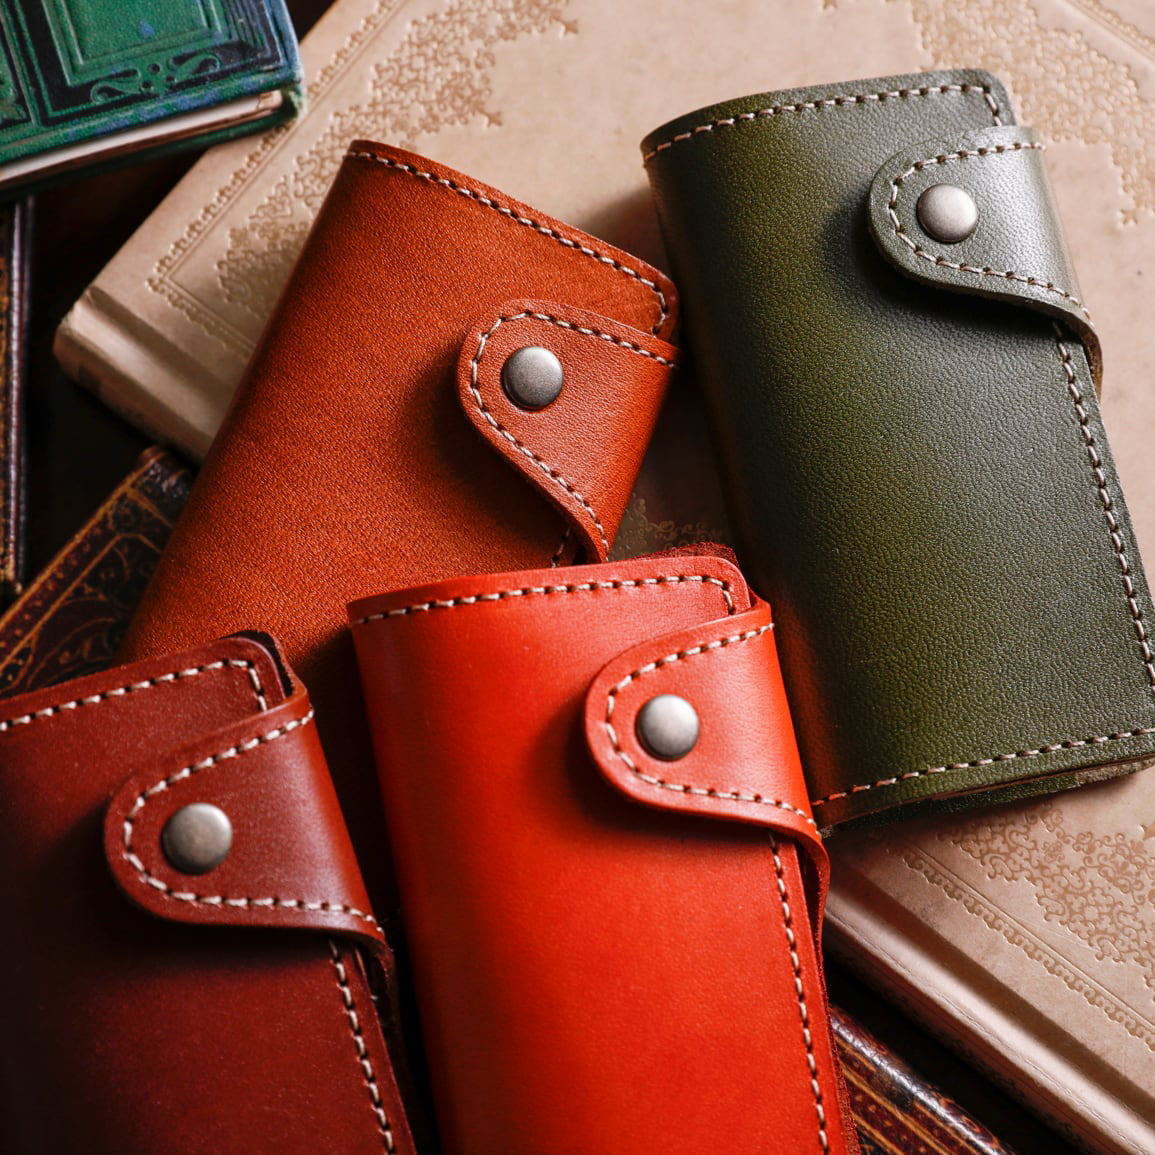 “Genuine leather key case” that fits comfortably in your hand (Tochigi Leather)